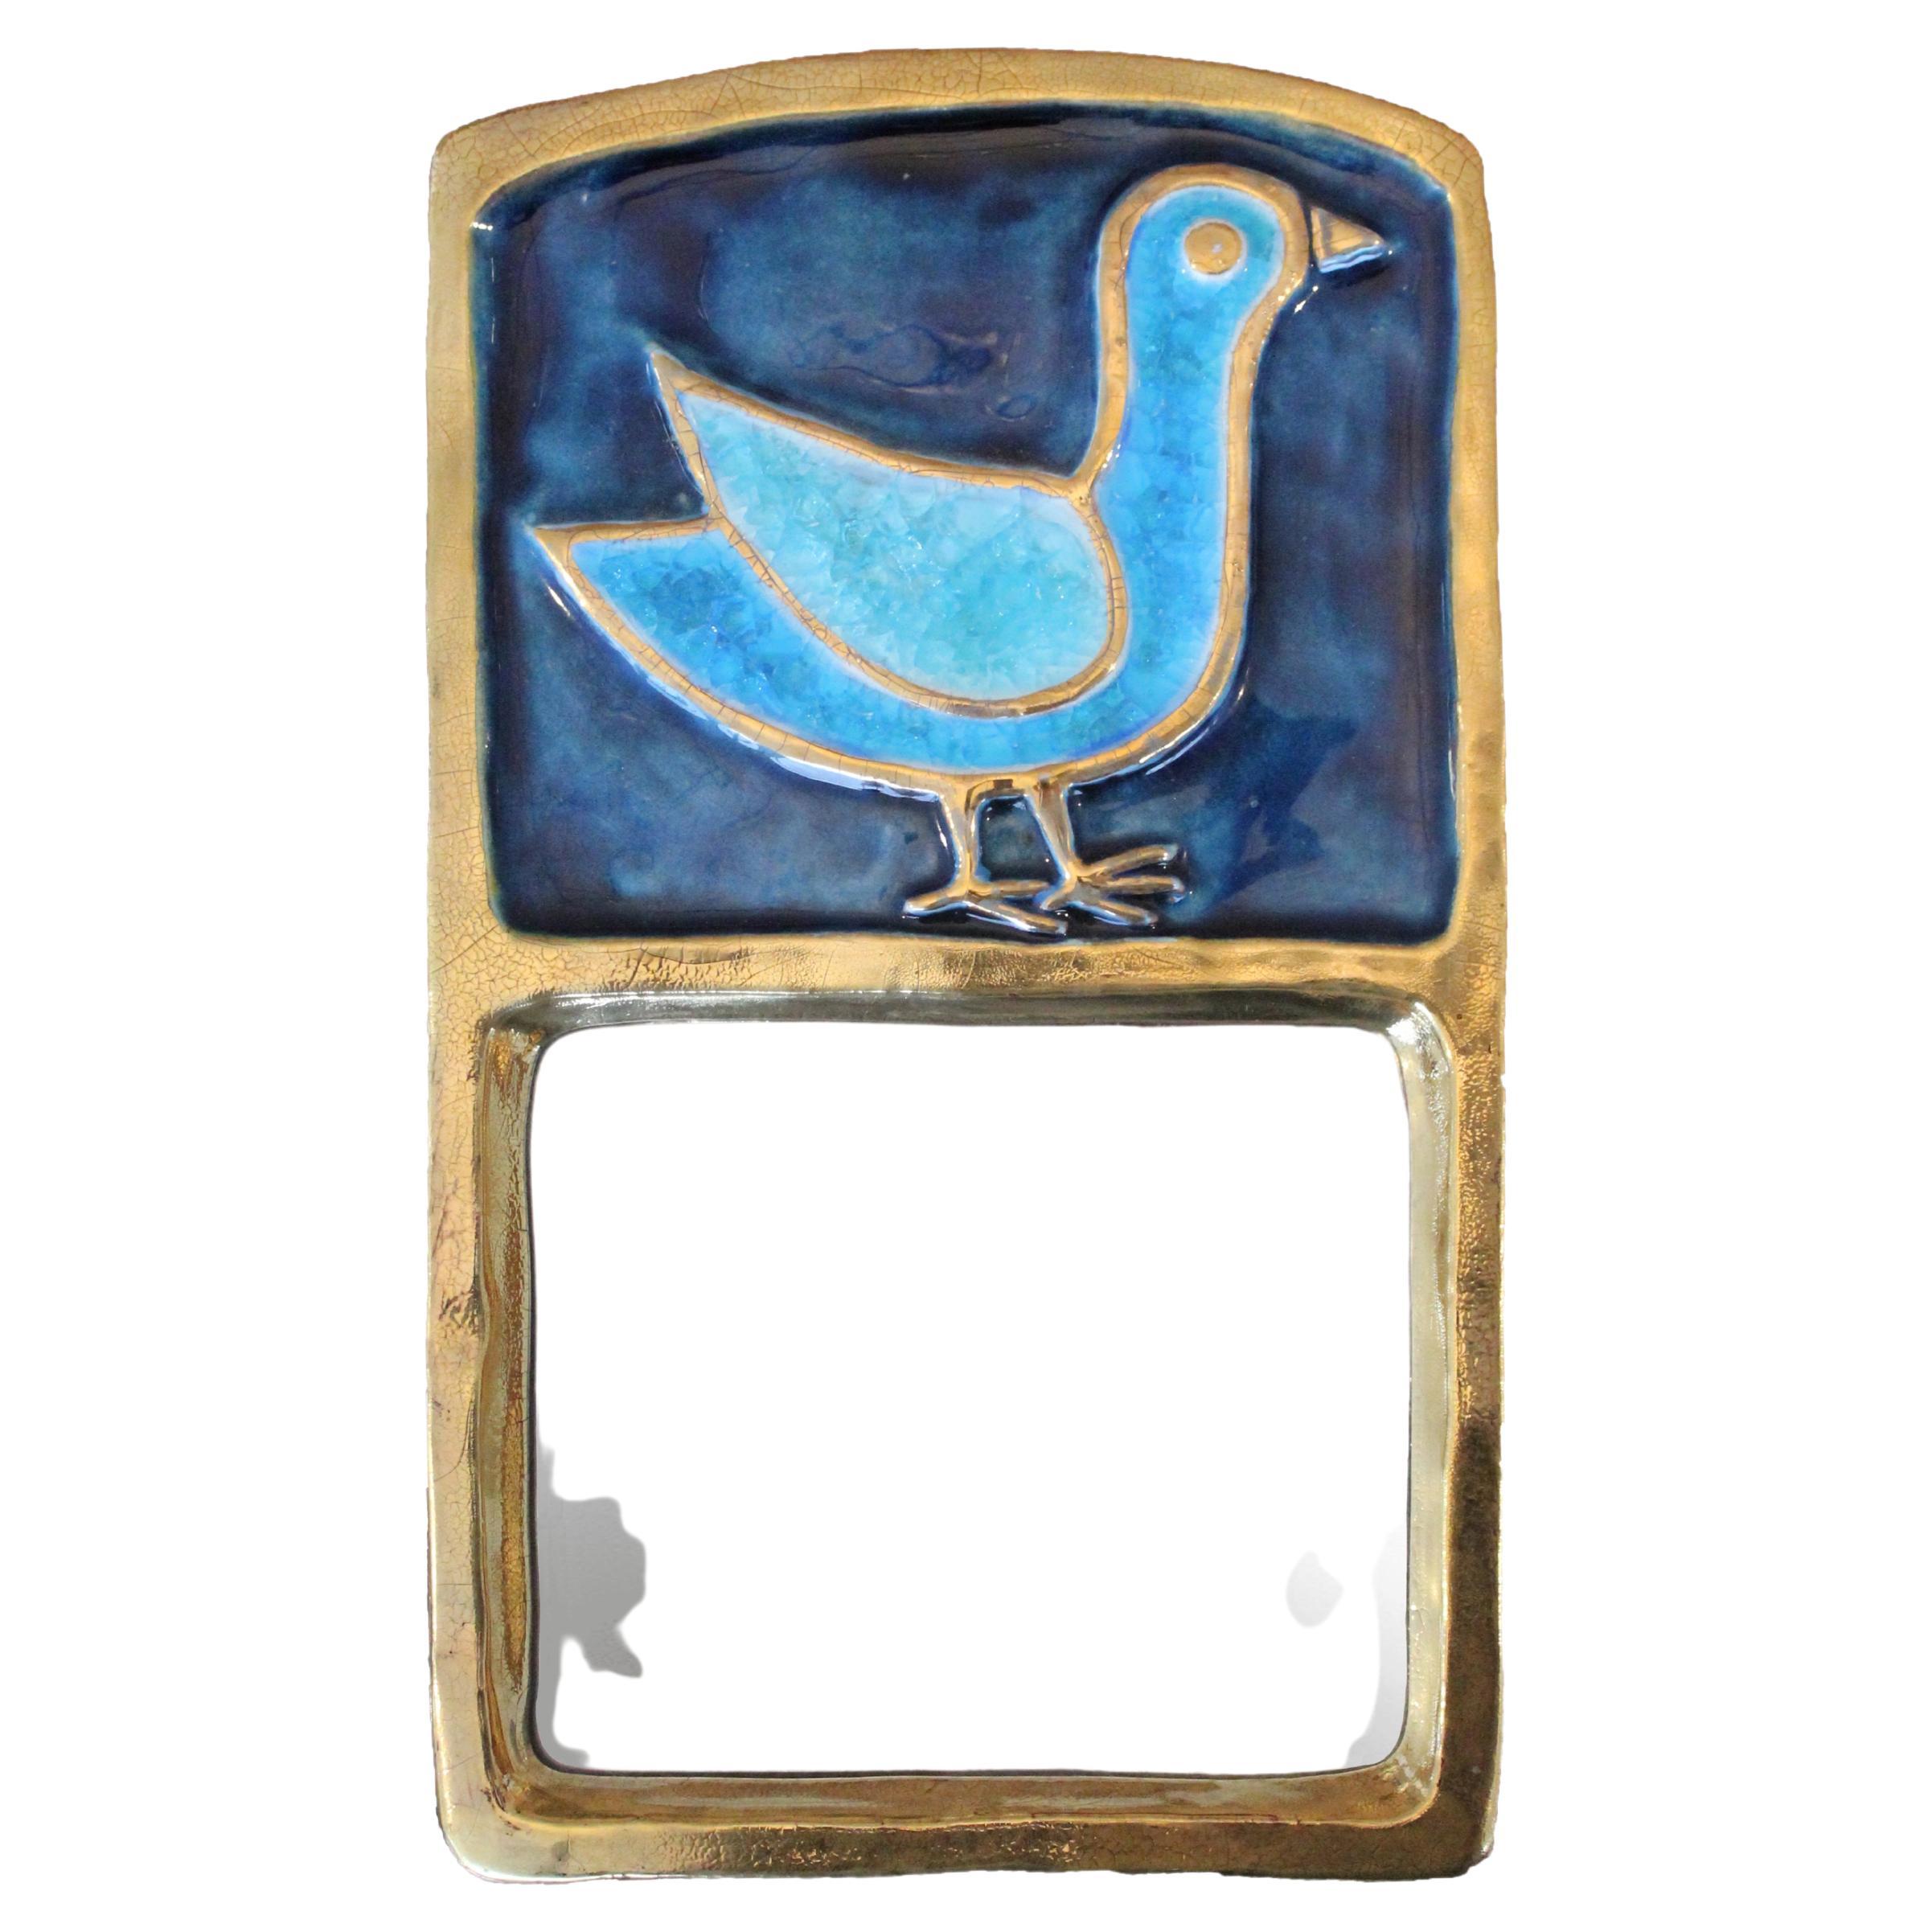 Mithé Espelt ceramic mirror, circa 1960, France.
Glazed embossed earthenware.
Crackled gold and crystallized blue glass.
Iconic mirror decorated with a bird
Original felt backing.
Circa 1960, France.
Very good condition.
The life of Mithé